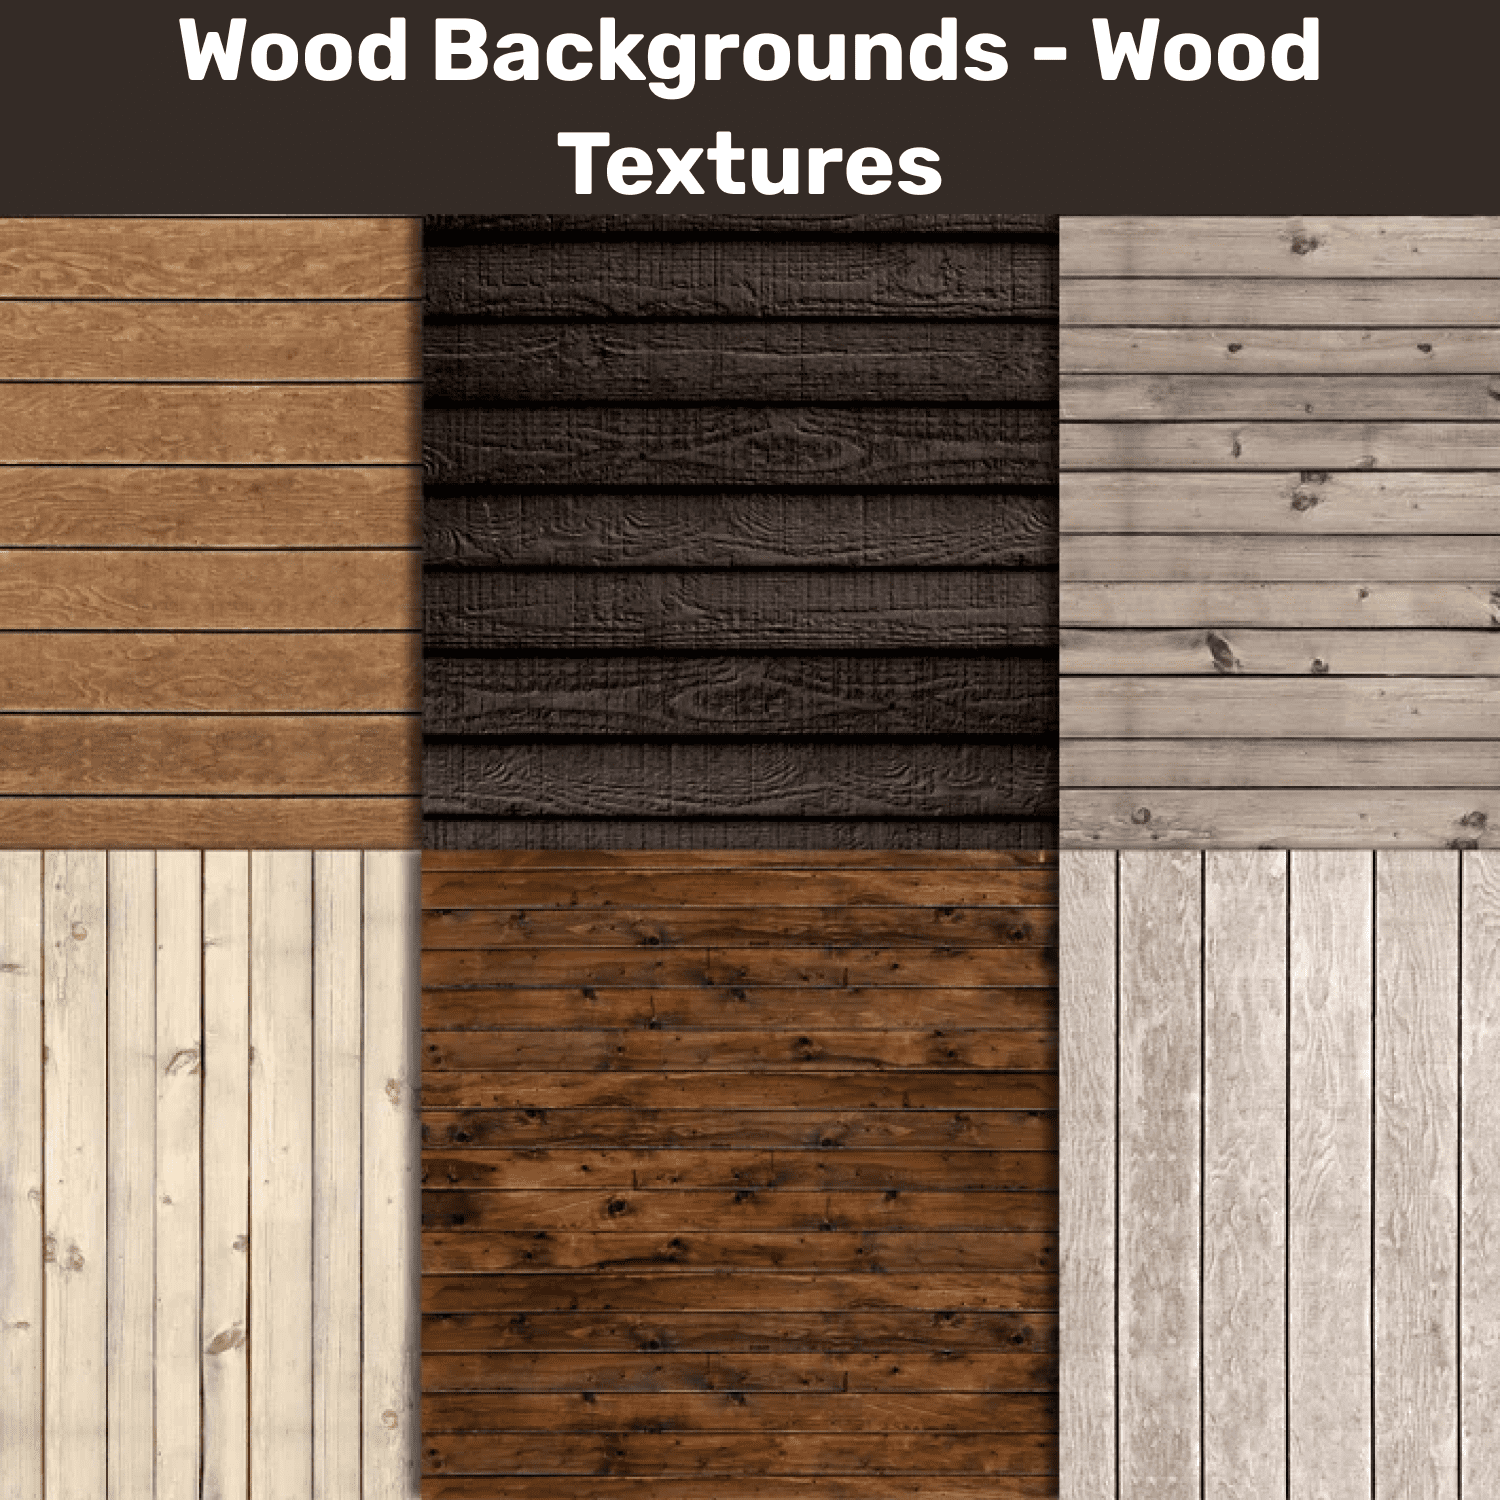 Wood Backgrounds - Wood Textures cover.